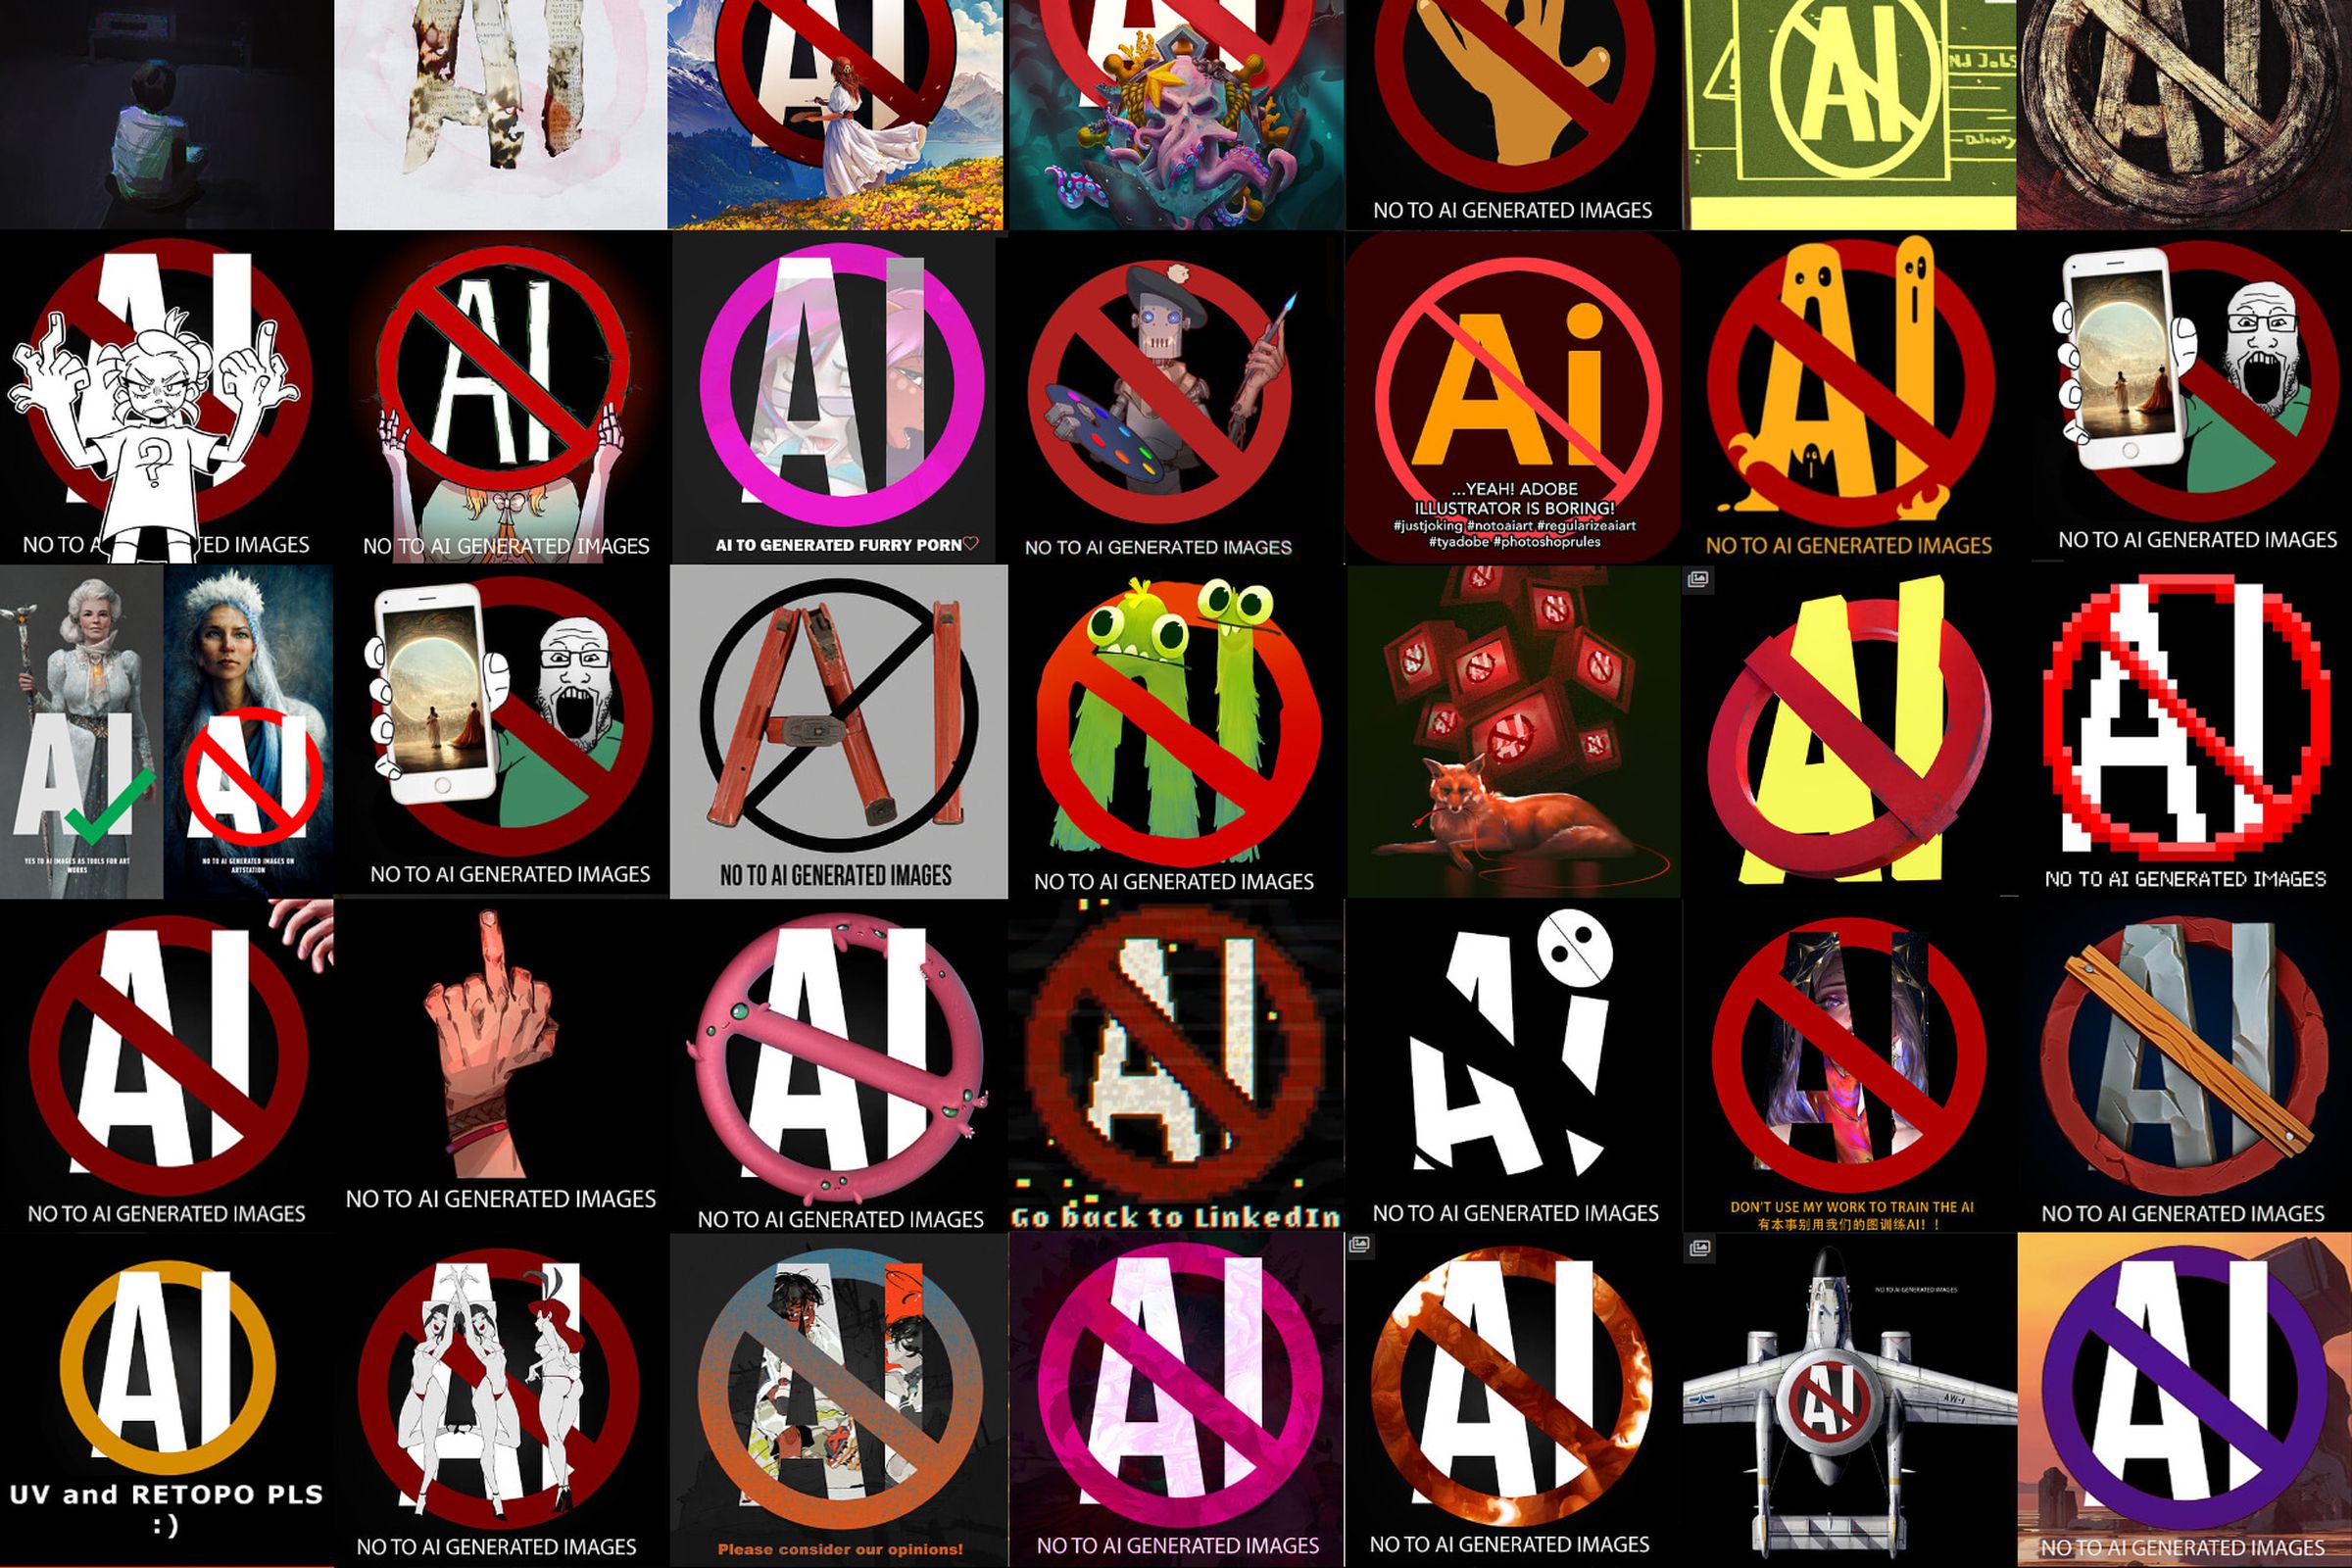 Multiple images protesting AI artwork on ArtStation. The images show the word “AI” with a cross over it, in a variety of styles.